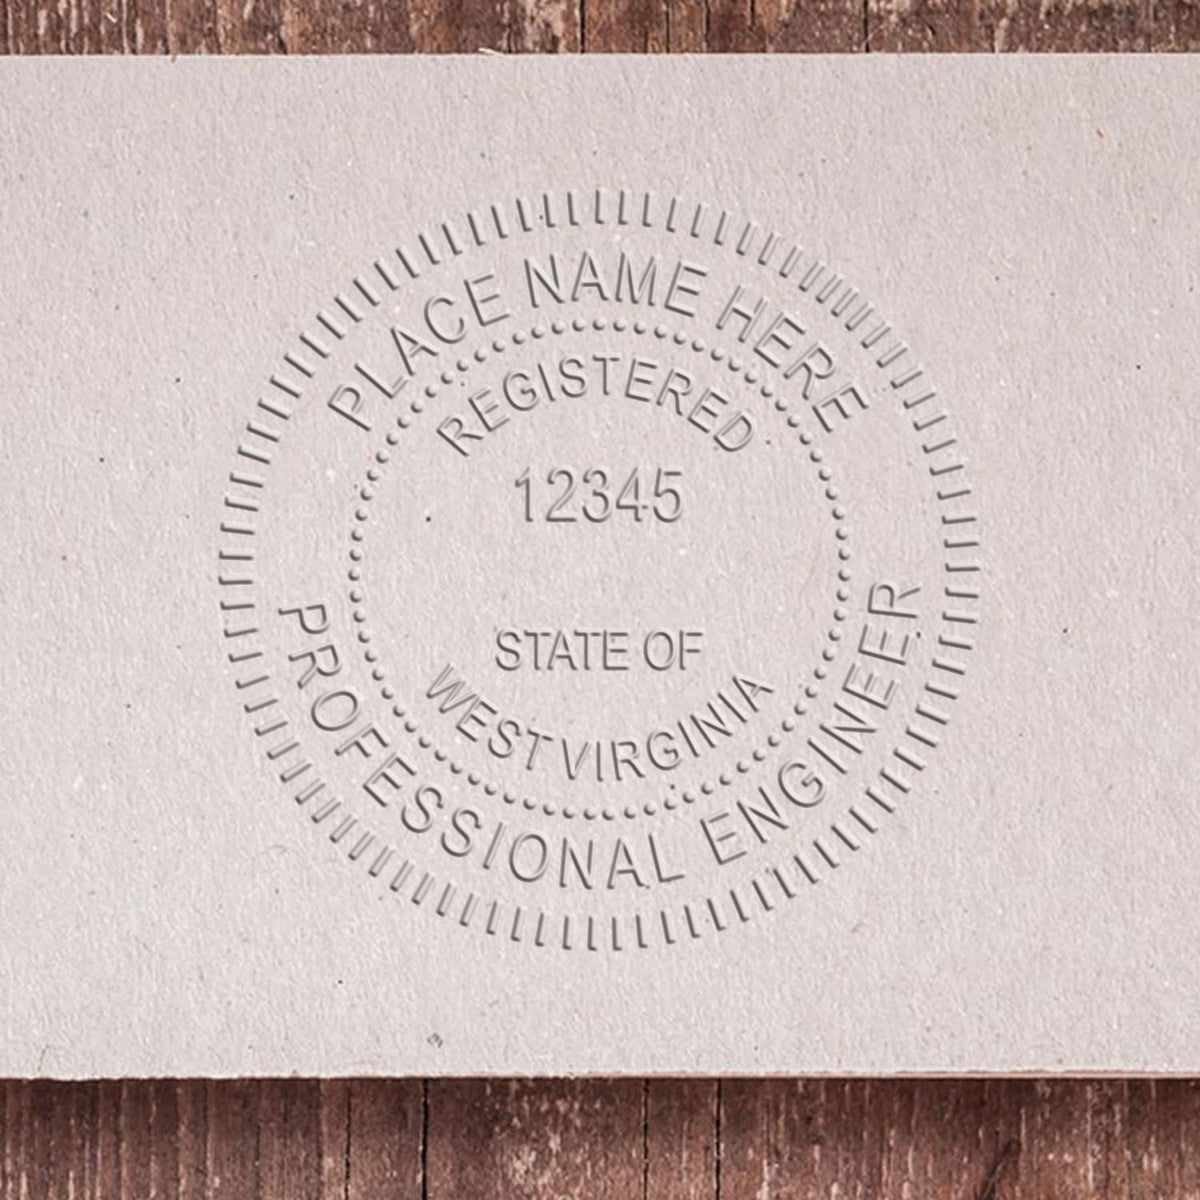 A photograph of the Hybrid West Virginia Engineer Seal stamp impression reveals a vivid, professional image of the on paper.